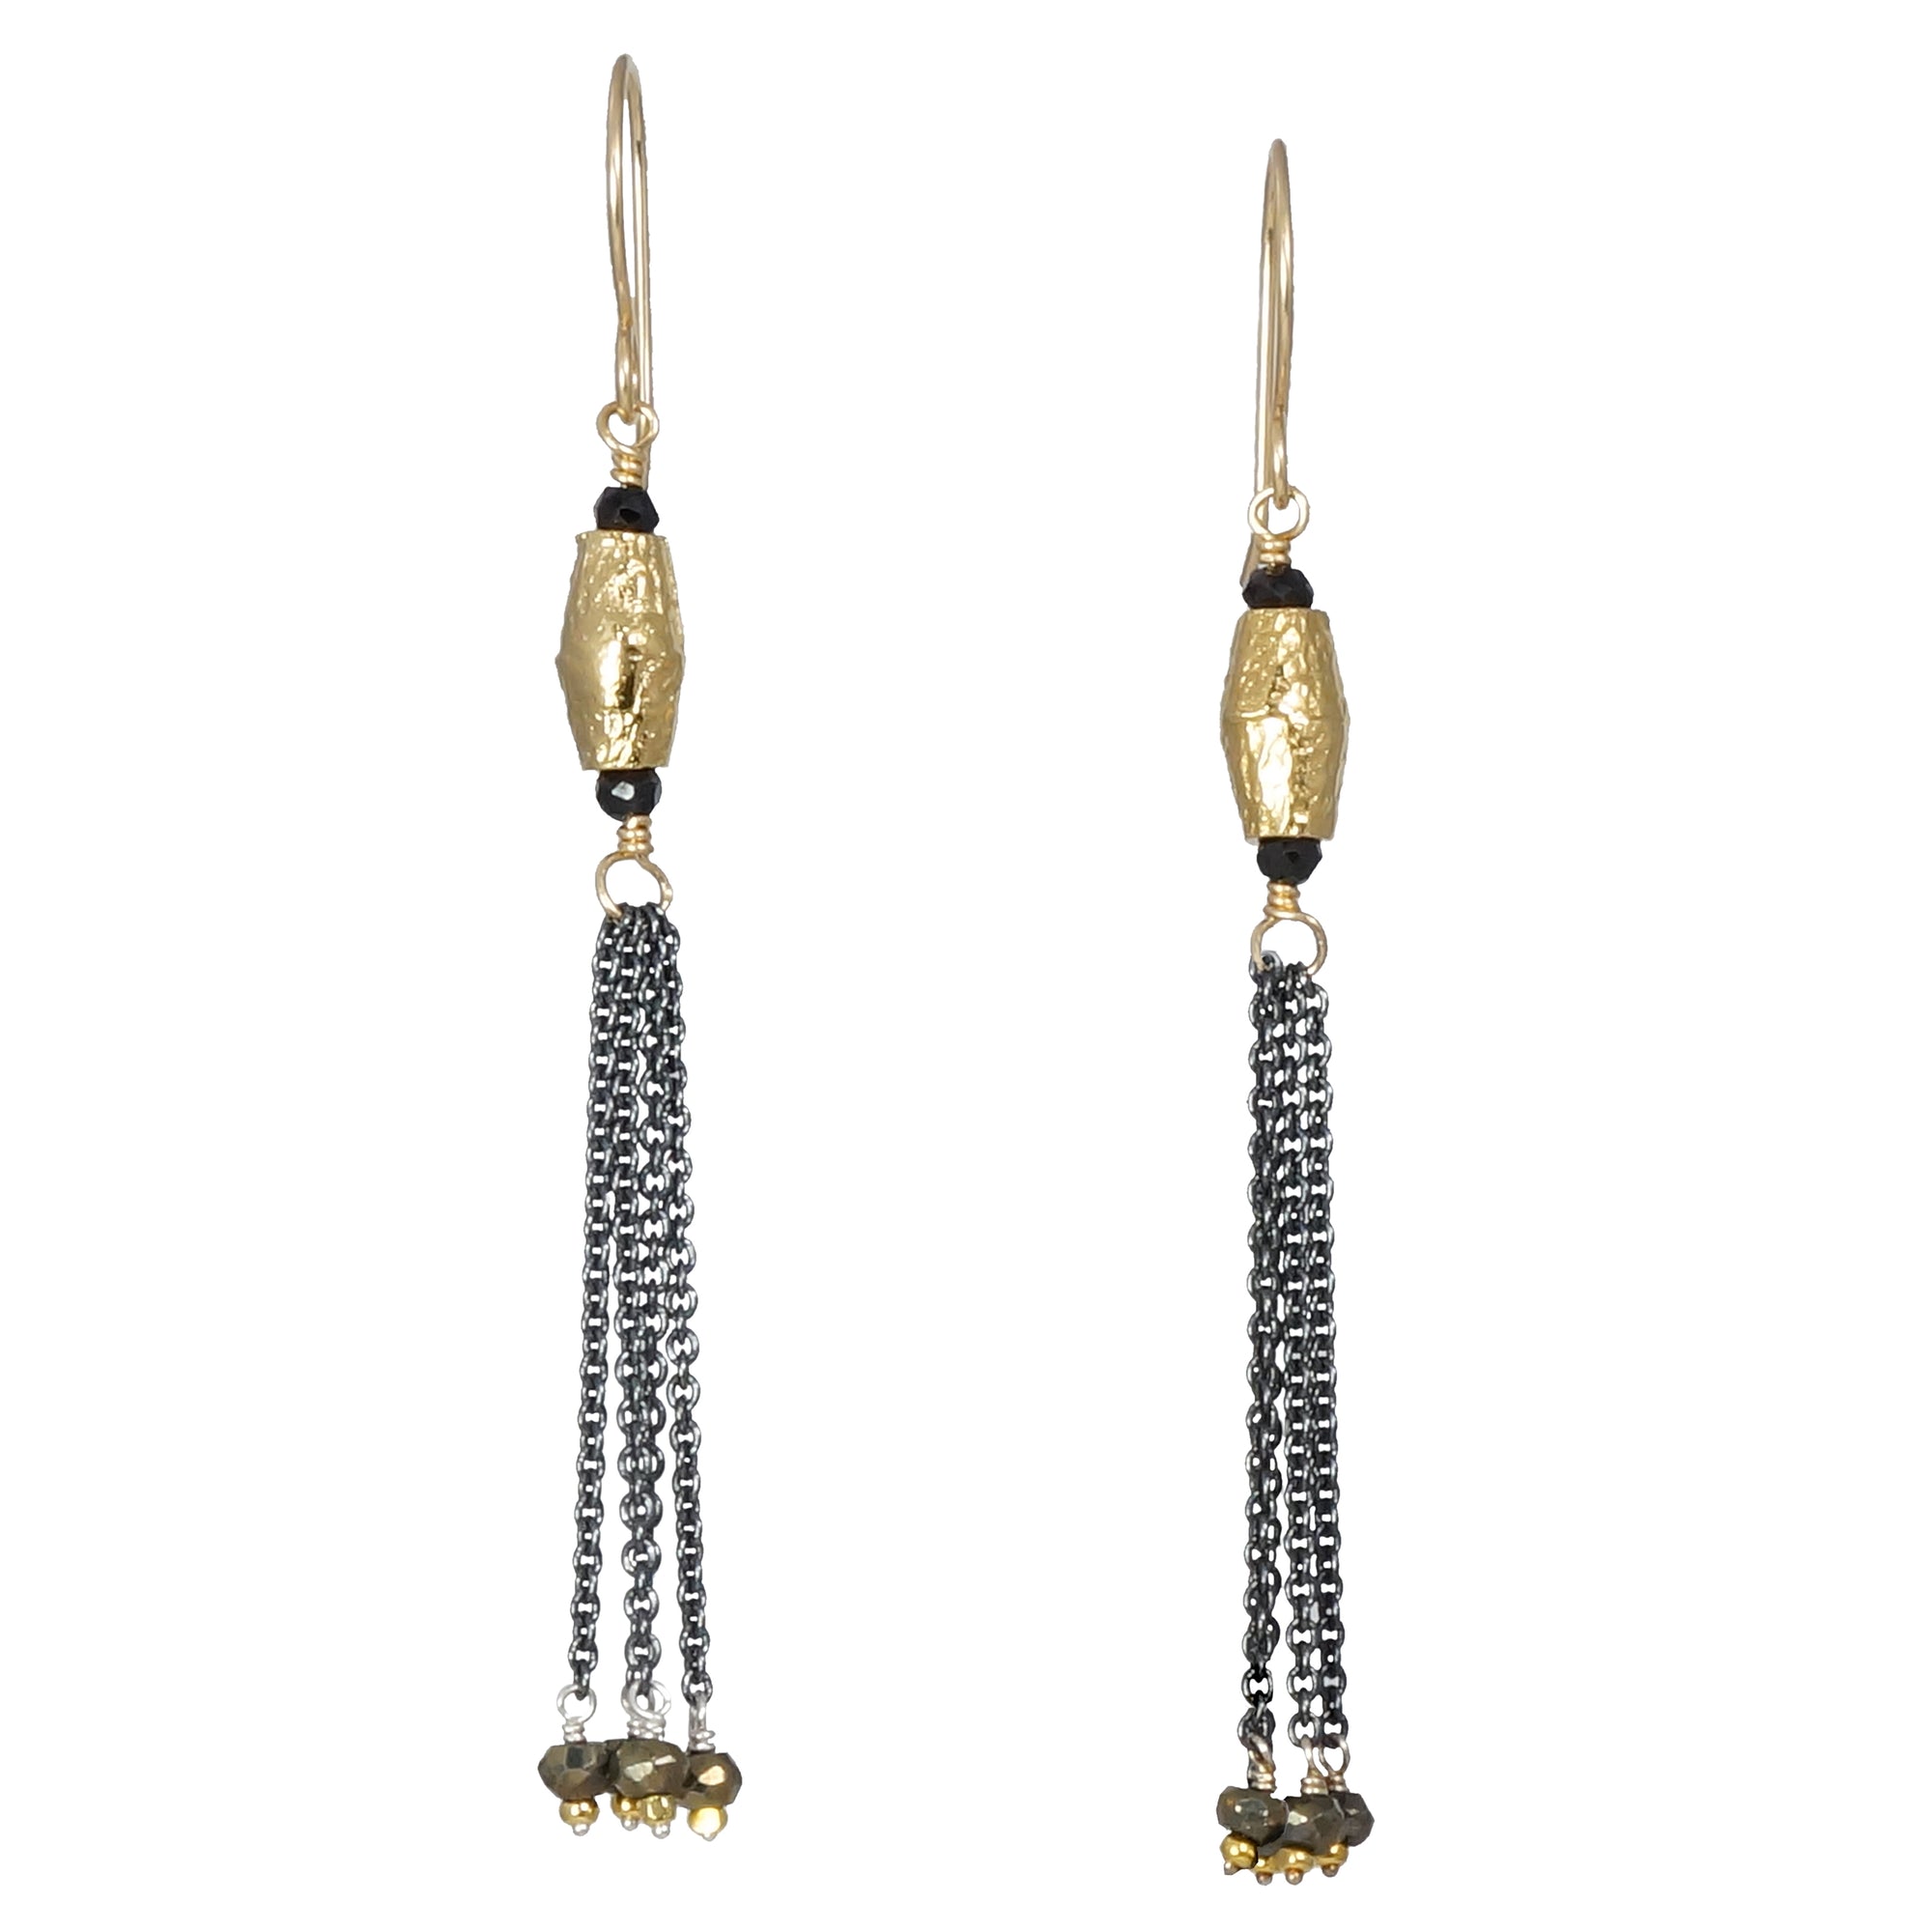 Spinel and Gold Mixed Metal Earrings with Tassels